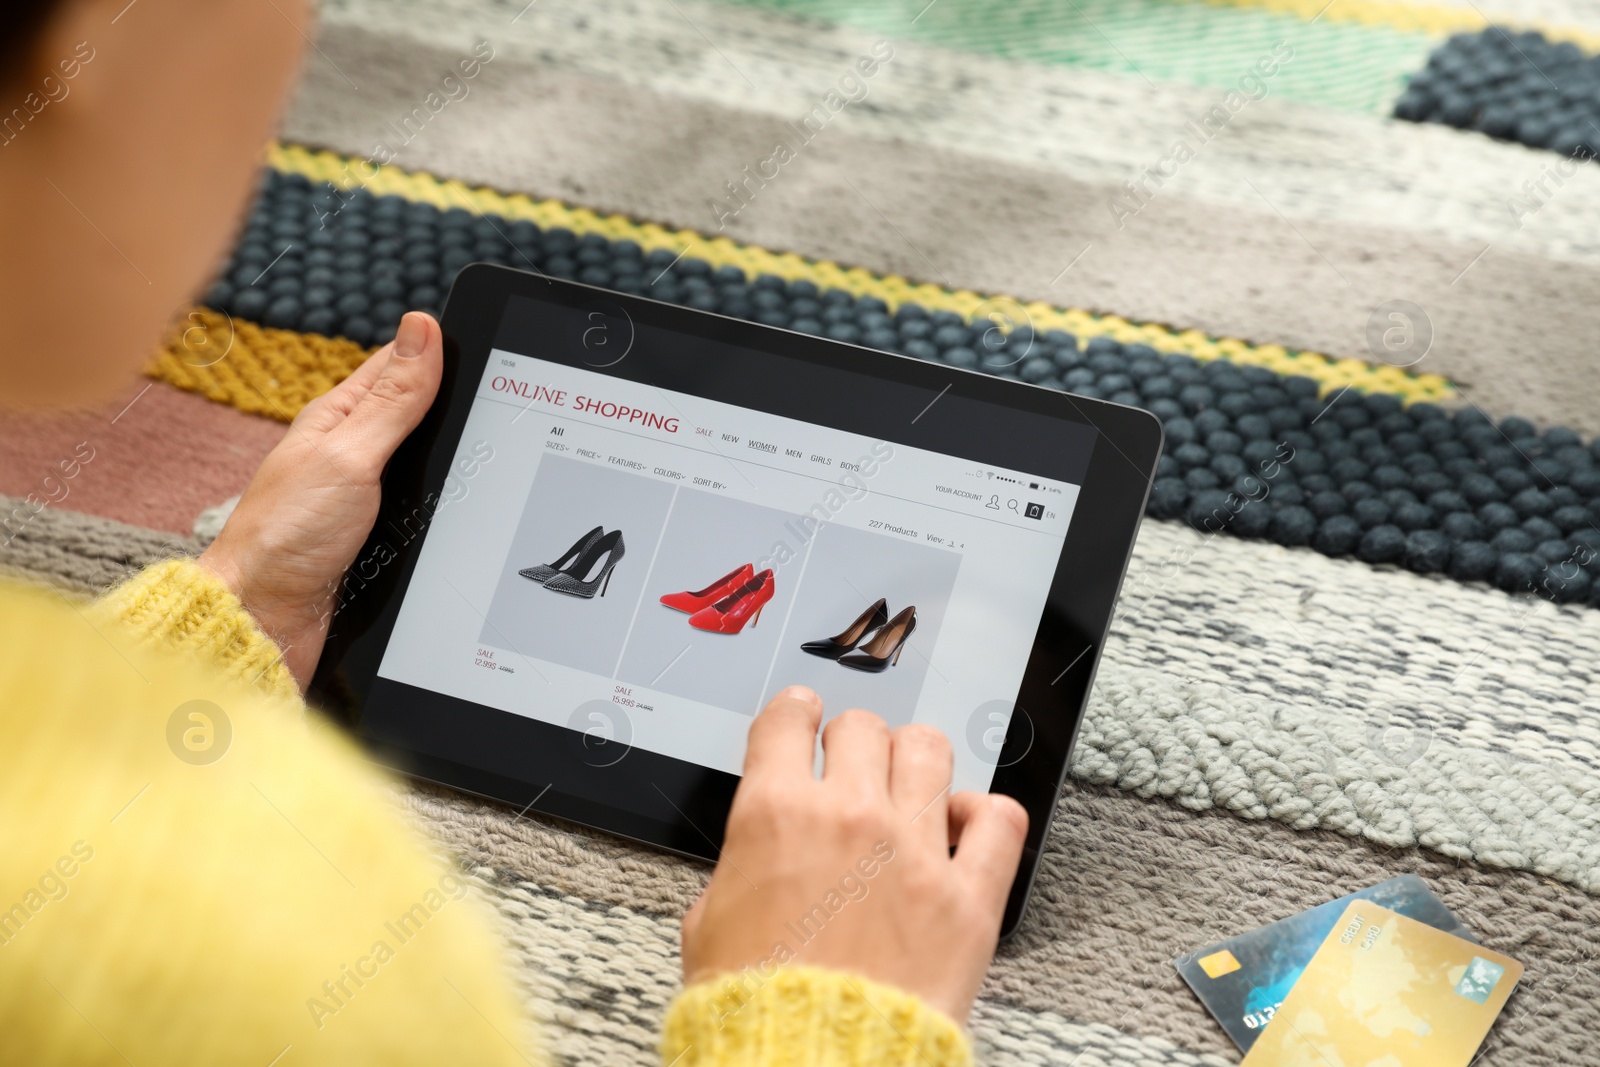 Photo of Woman with credit cards using tablet for online shopping on carpet, closeup